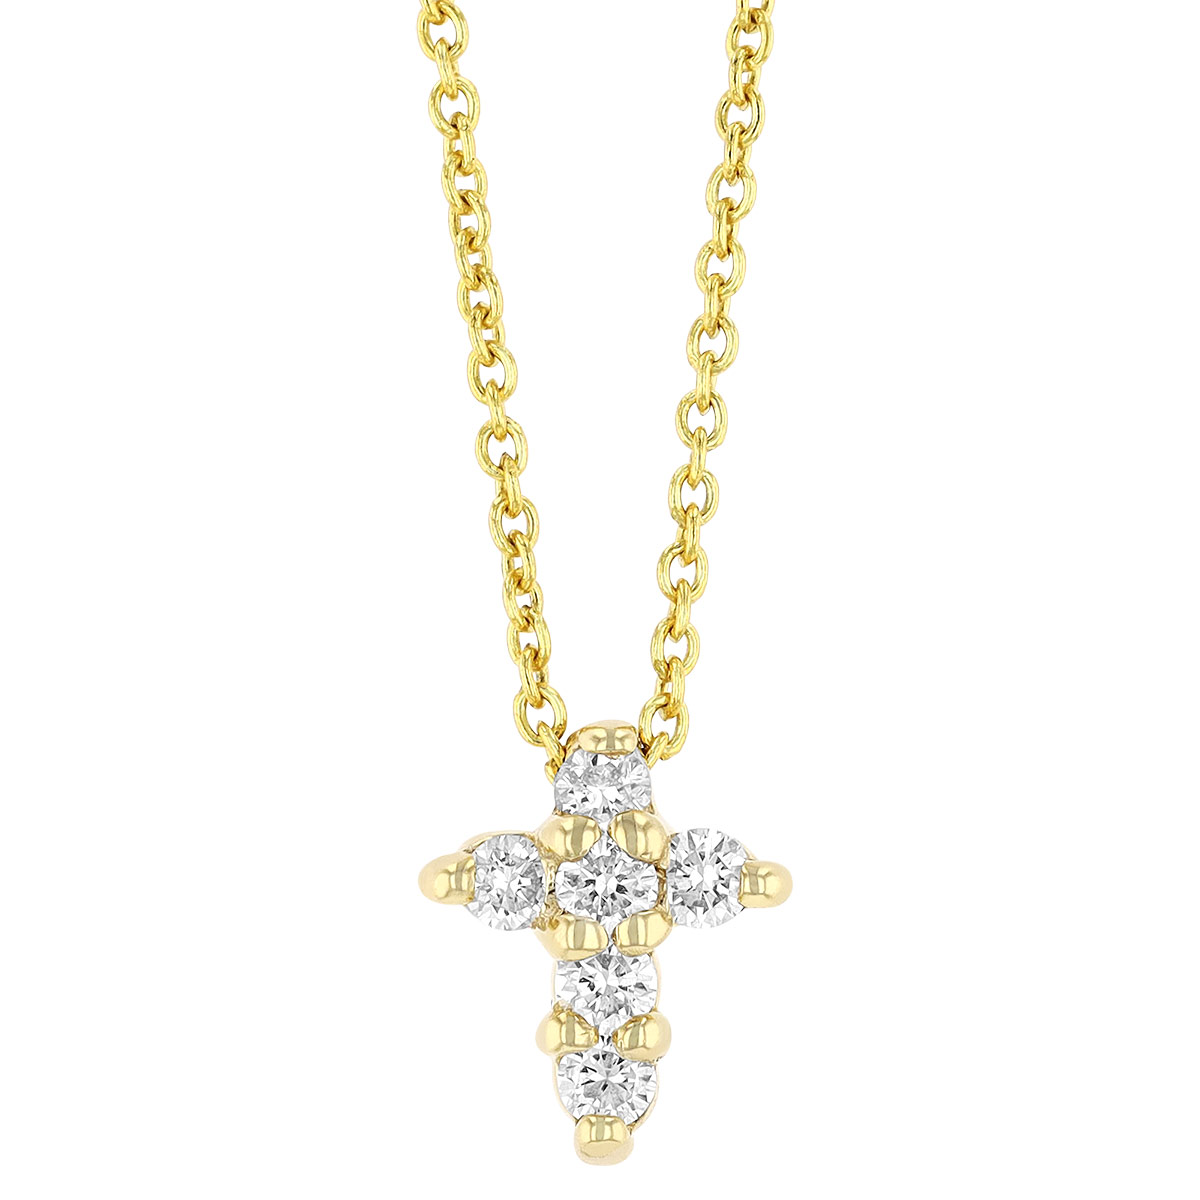 Tiny Treasures Rose Gold Baby Cross Necklace with Diamonds, 0.11 cttw ...